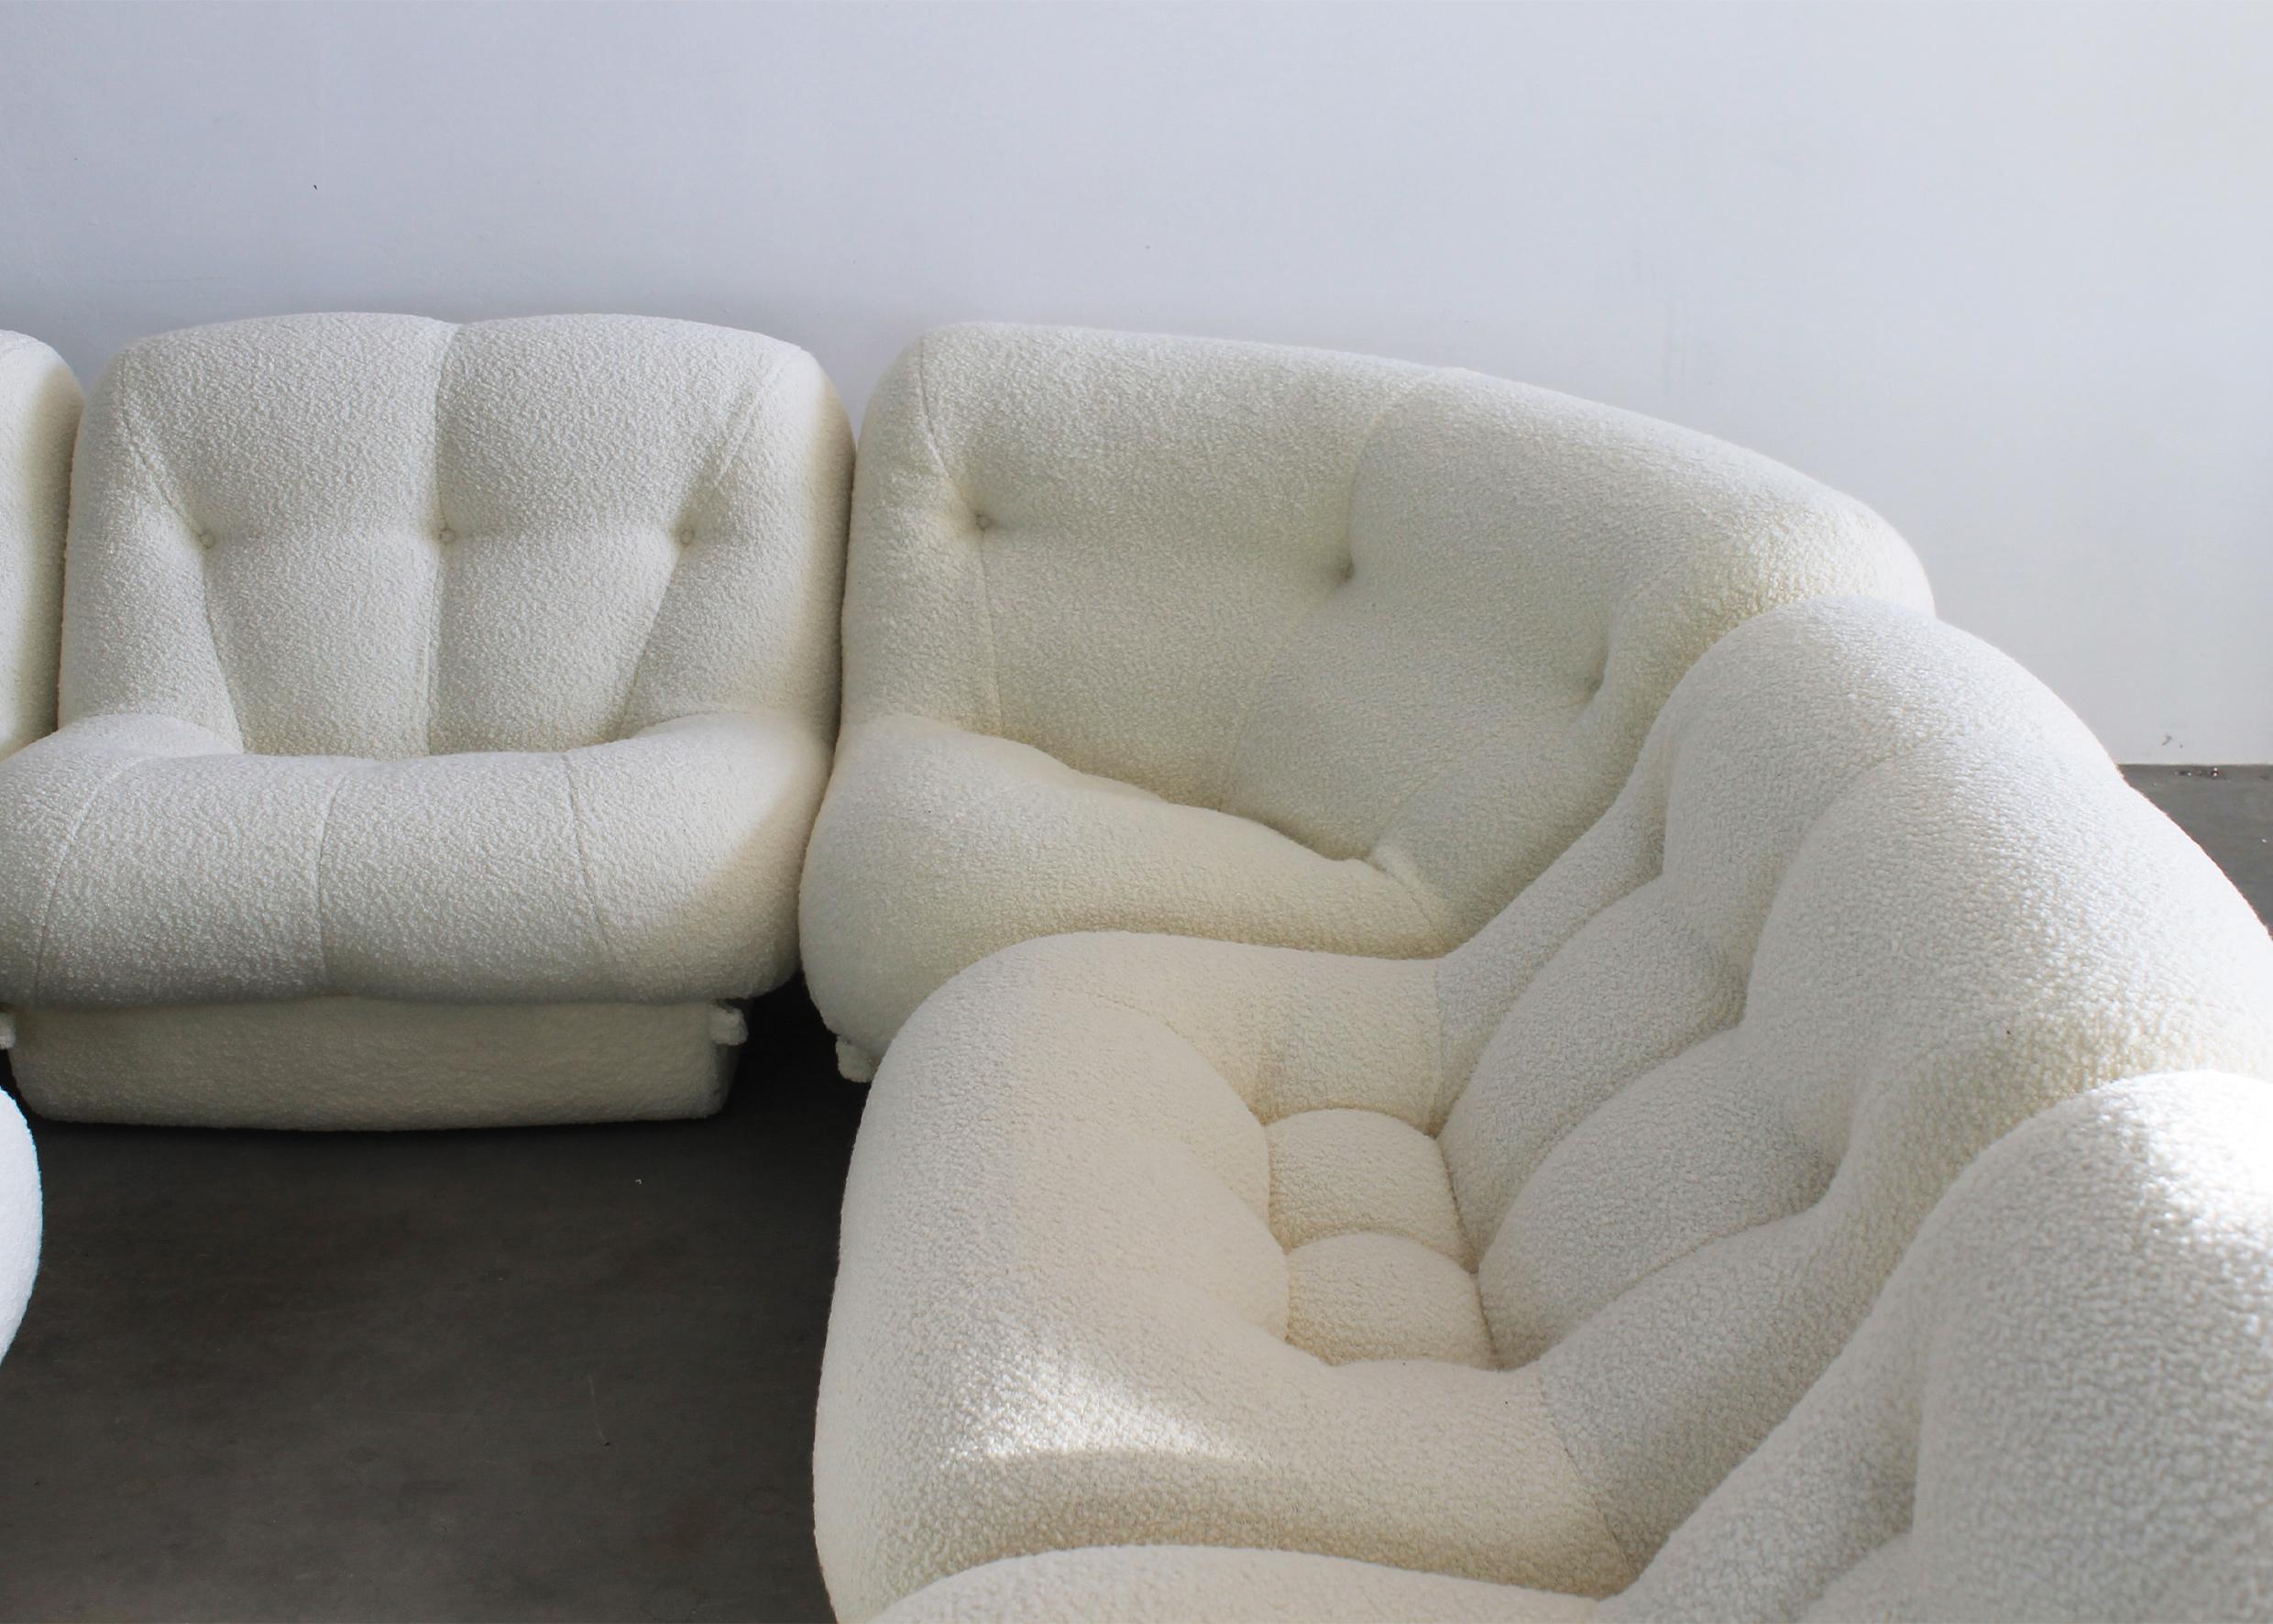 Late 20th Century Rino Maturi Nuvolone Living Room Set in White Boucle by MIMO Padova 1970s Italy For Sale